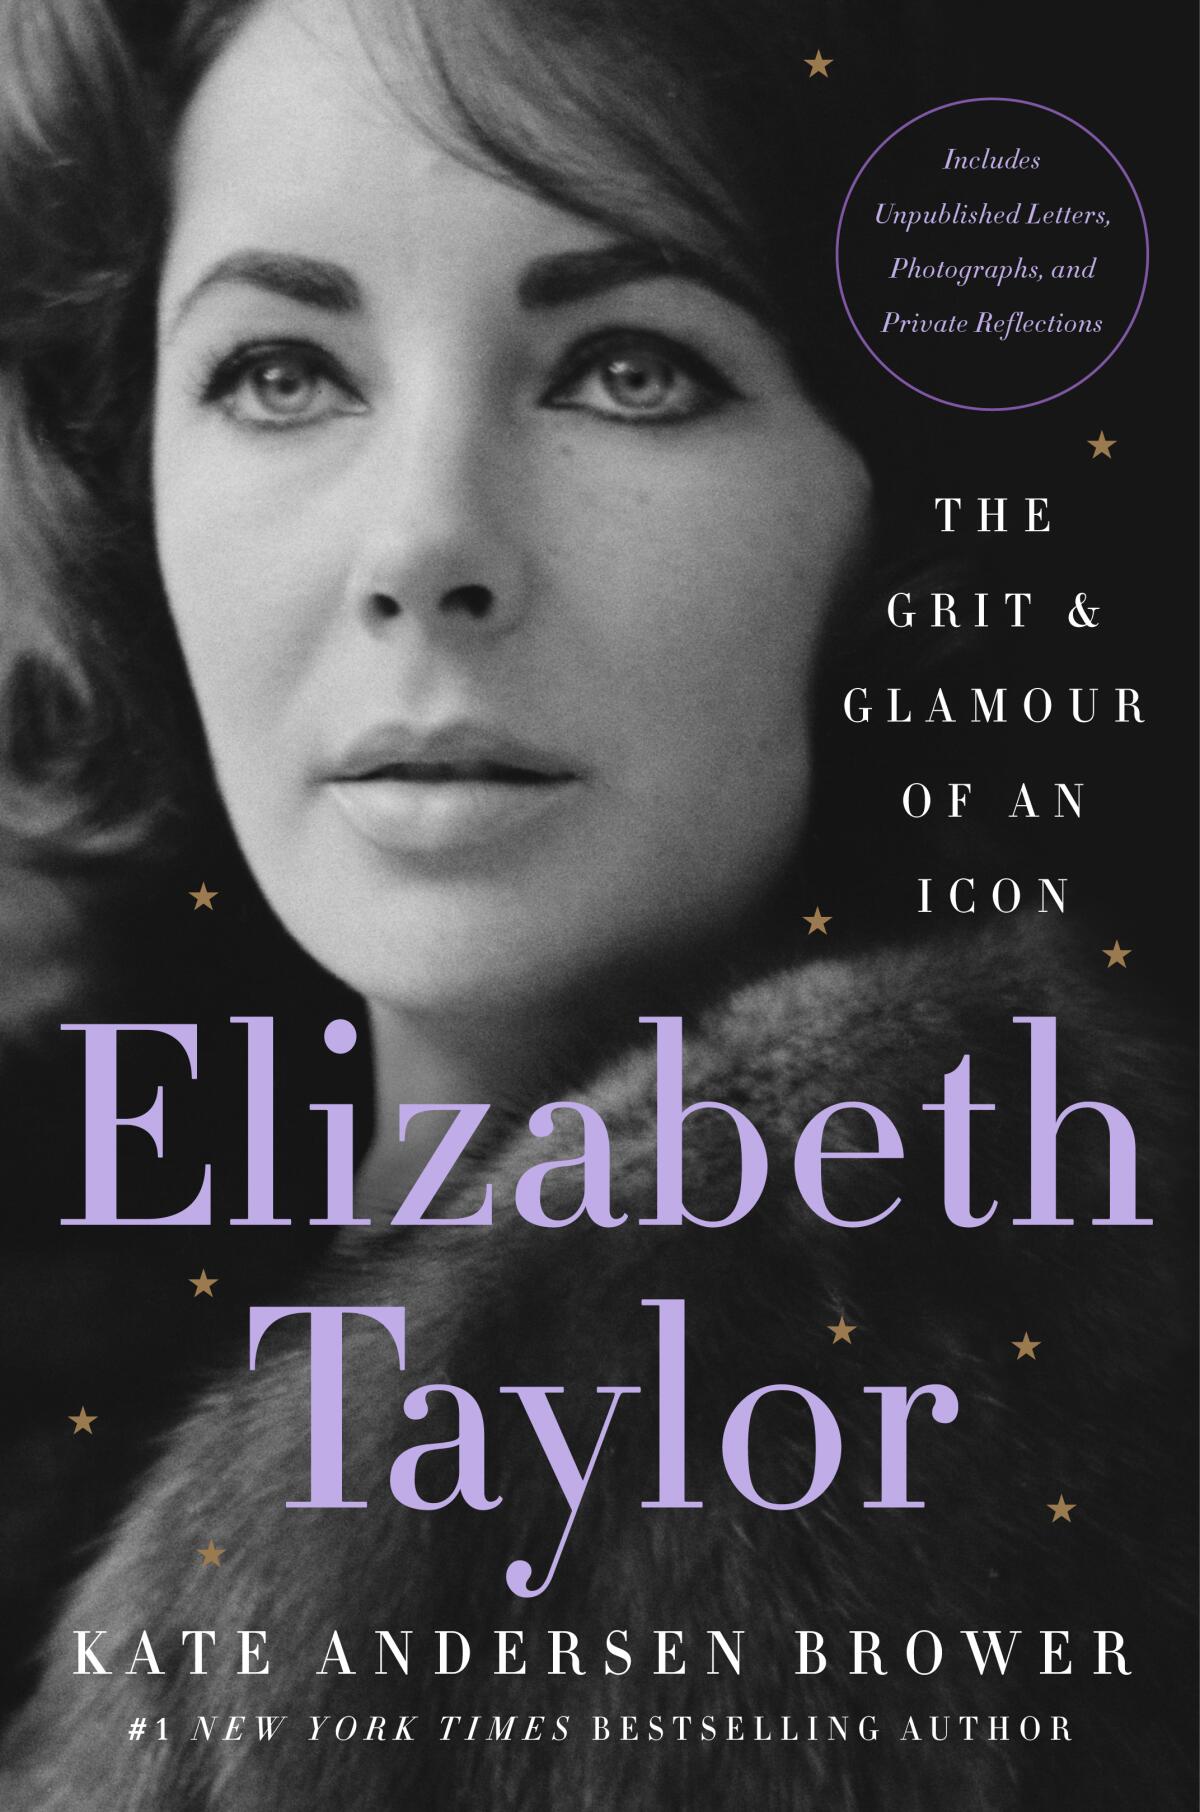 "Elizabeth Taylor: The Grit & Glamour of an Icon" by Kate Andersen Brower